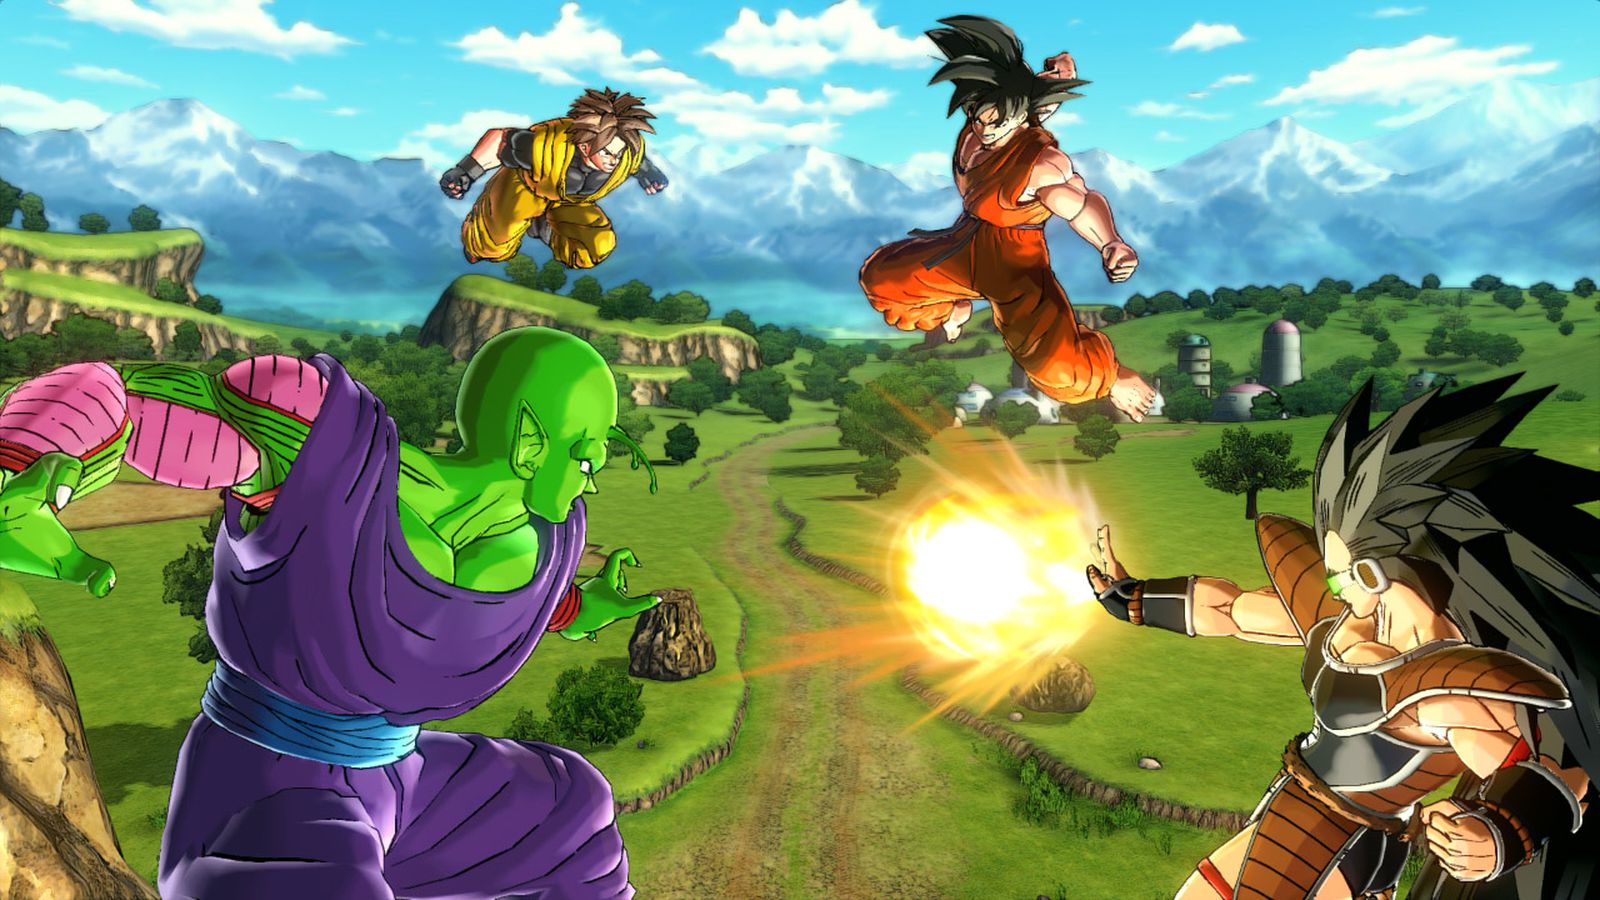 The new Dragon Ball game lets you create your own custom